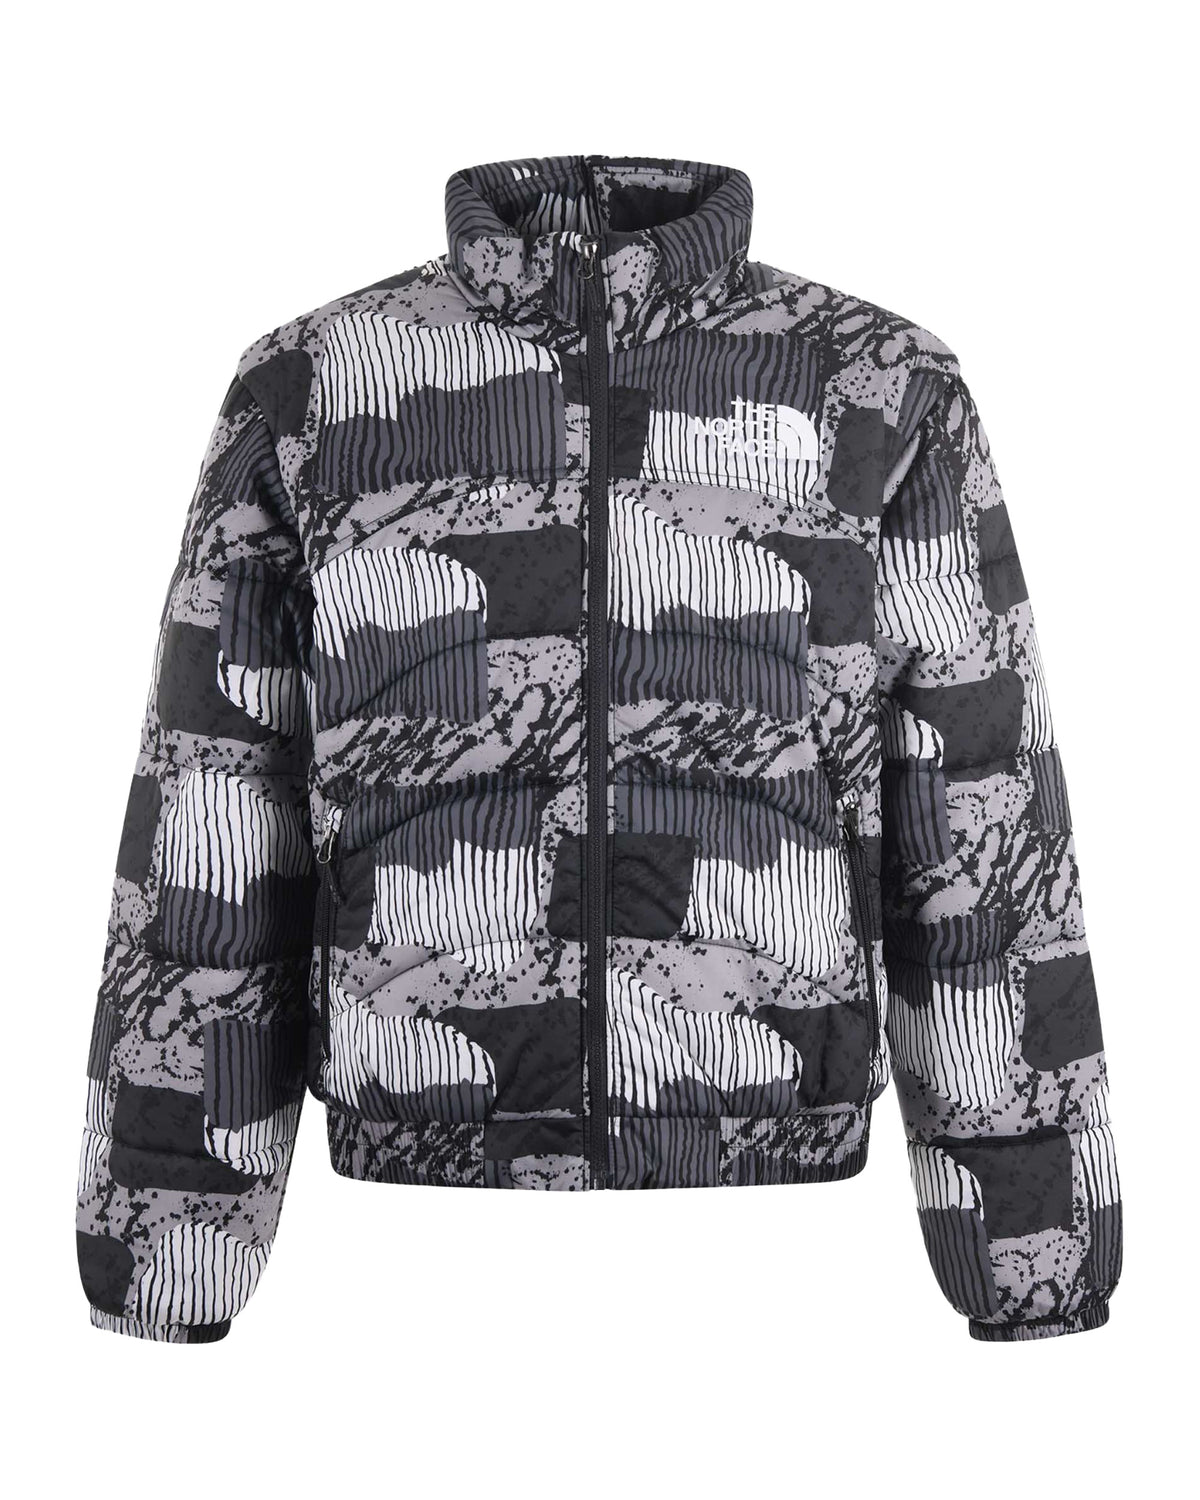 Giacca Uomo The North Face Tnf Jacket 2000 Print